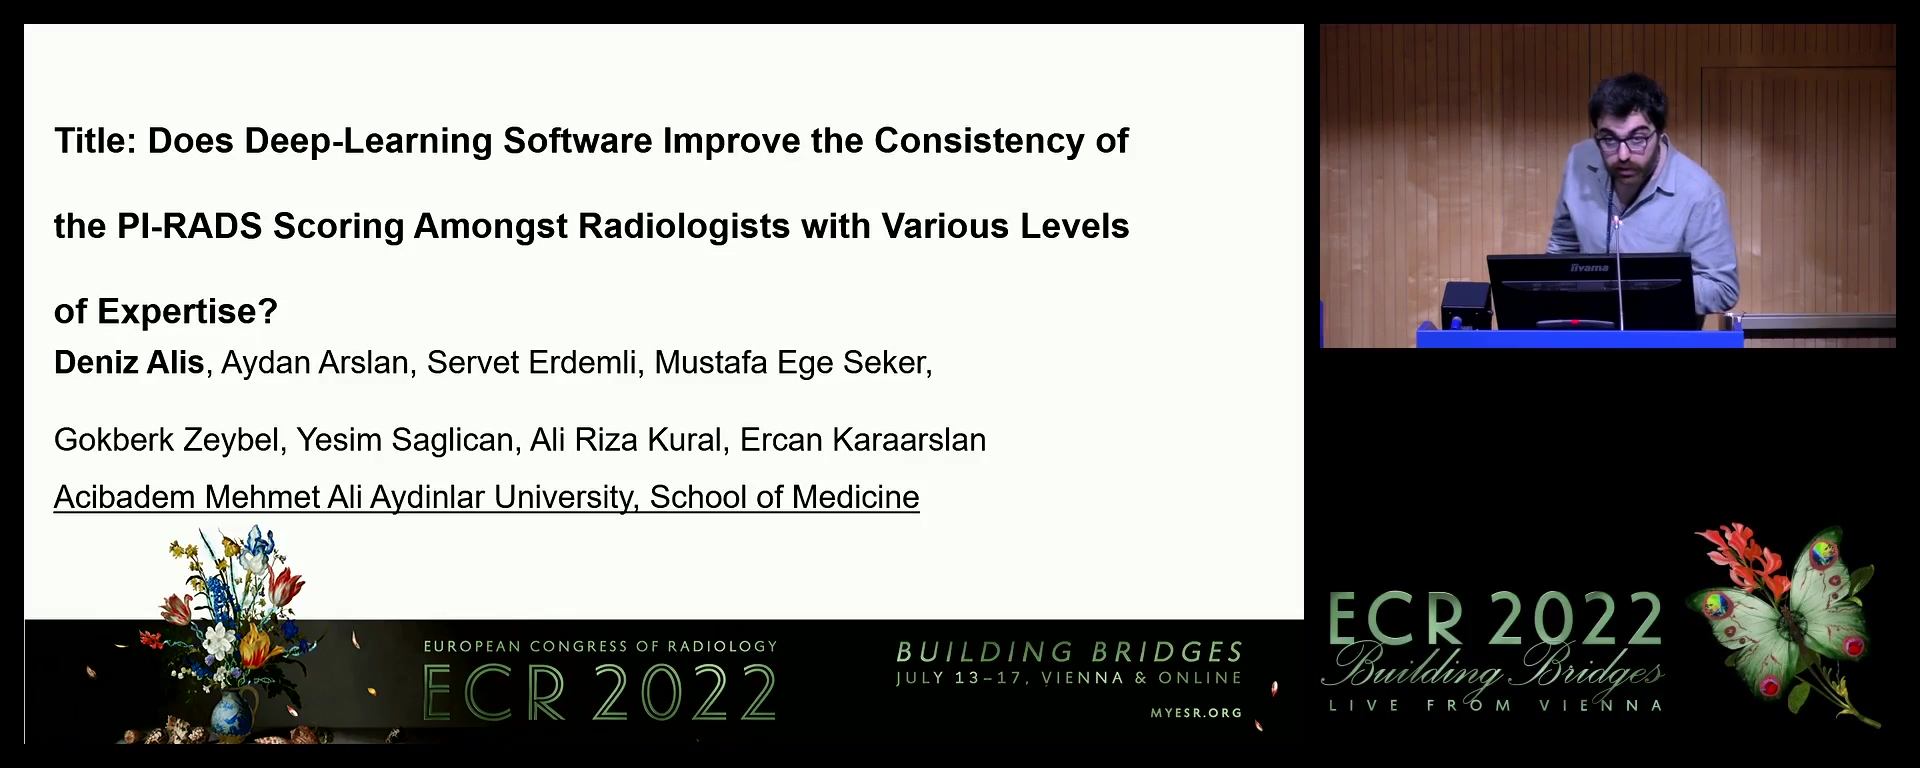 Does deep-learning software improve the consistency of PI-RADS scoring amongst radiologists with various levels of expertise? - Deniz Alis, Istanbul / TR